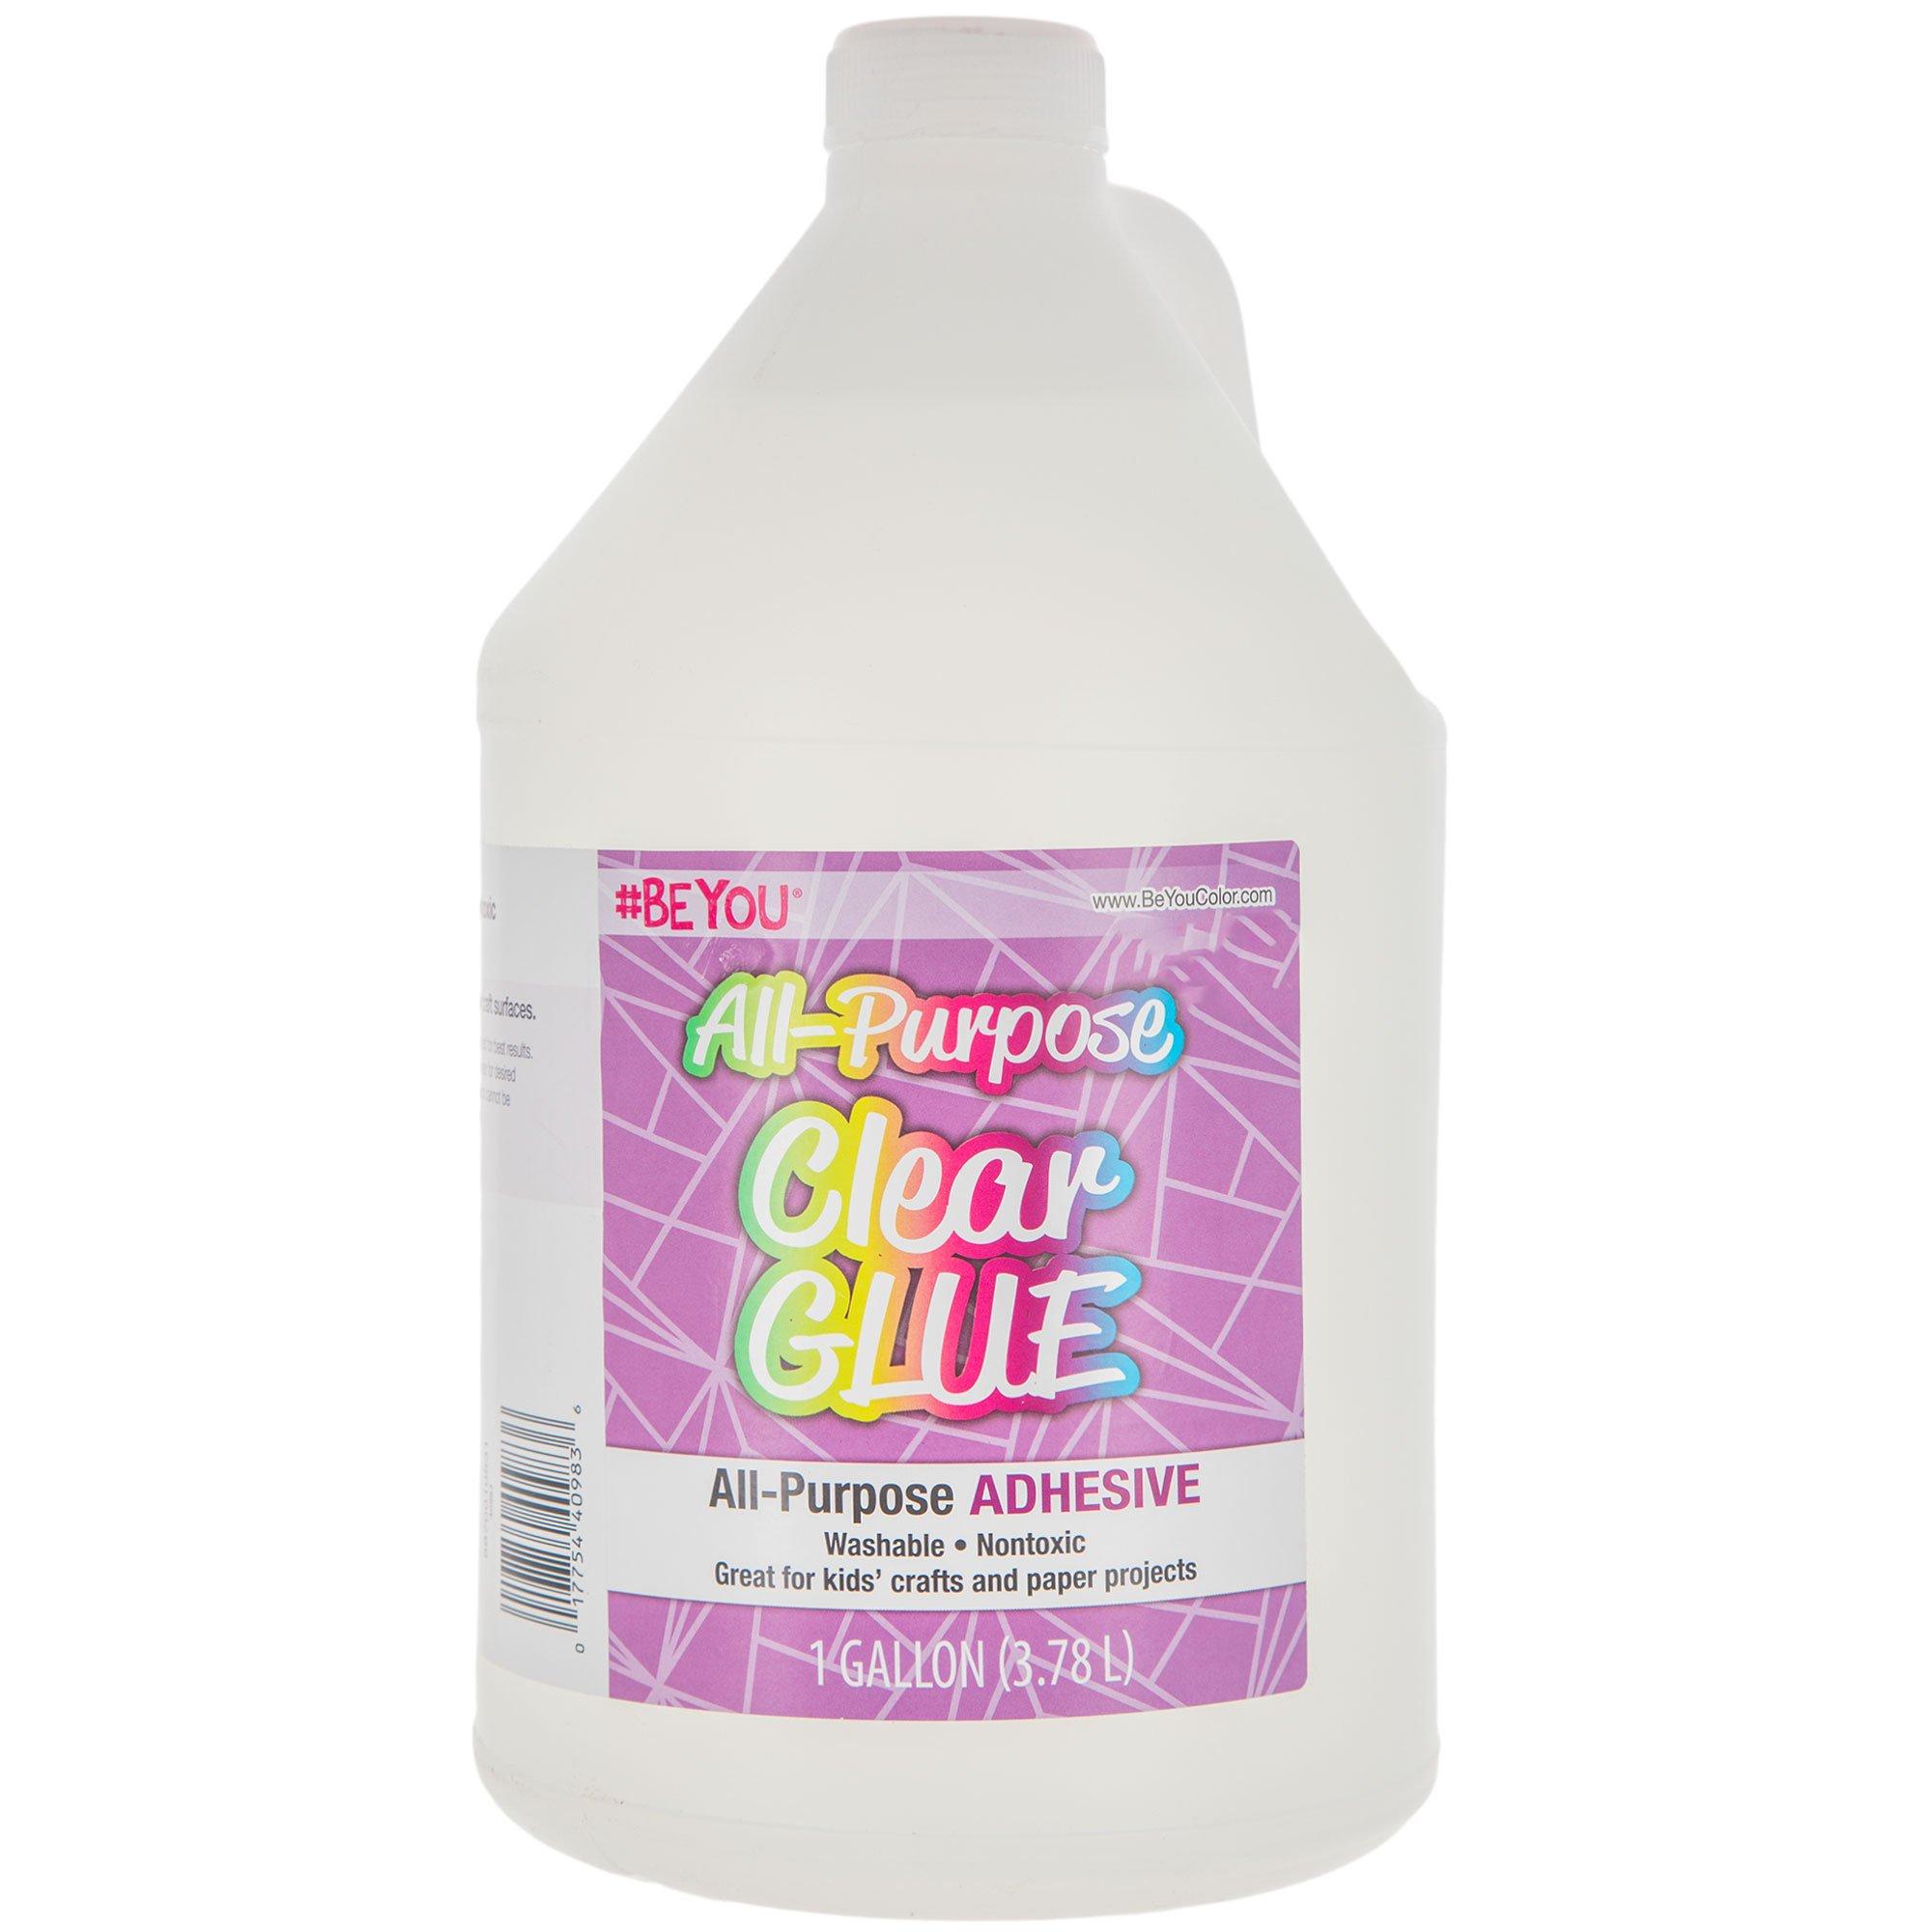 WE FOUND GALLONS OF ELMER'S CLEAR GLUE SHOPPING FOR SLIME SUPPLIES 